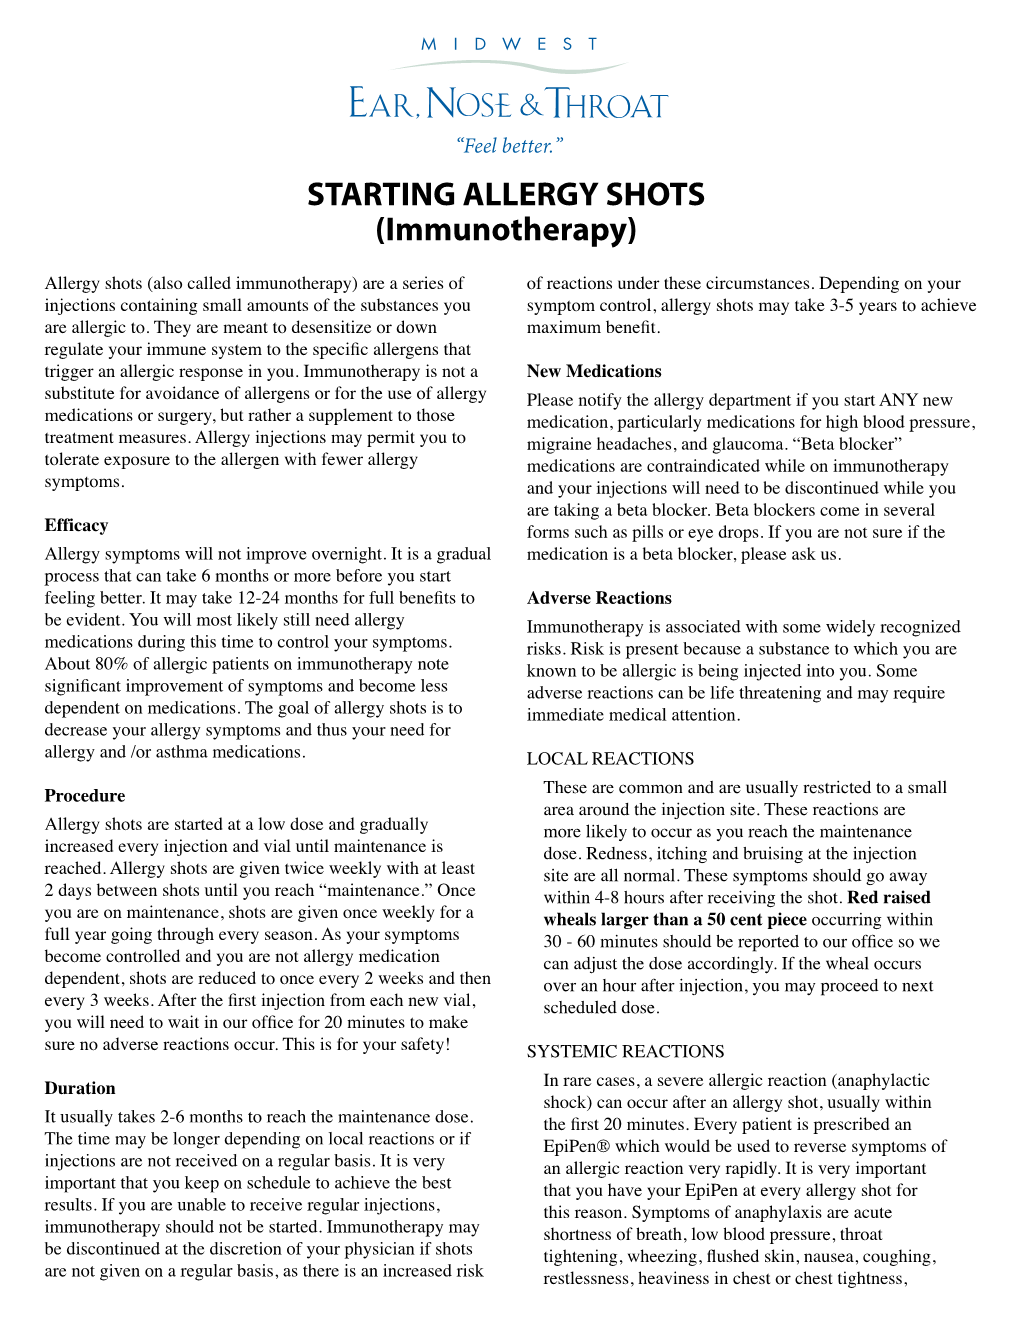 STARTING ALLERGY SHOTS (Immunotherapy)